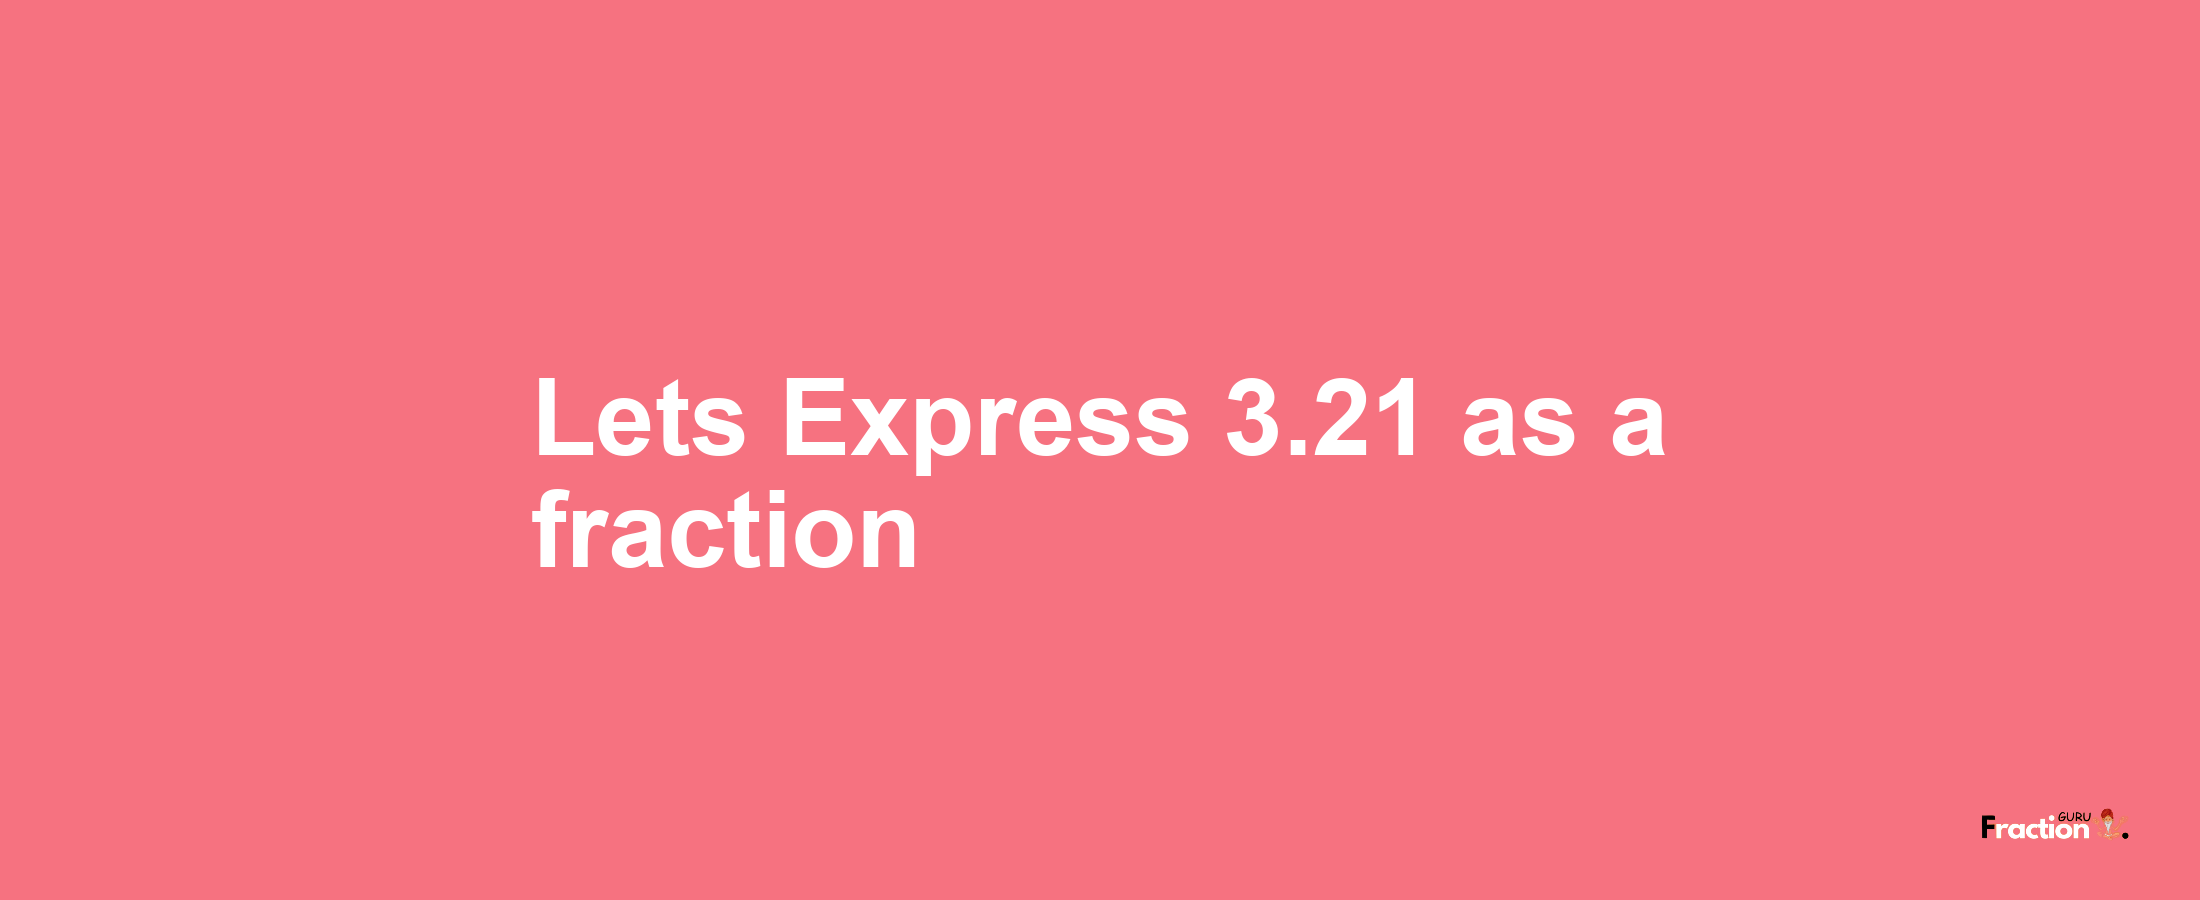 Lets Express 3.21 as afraction